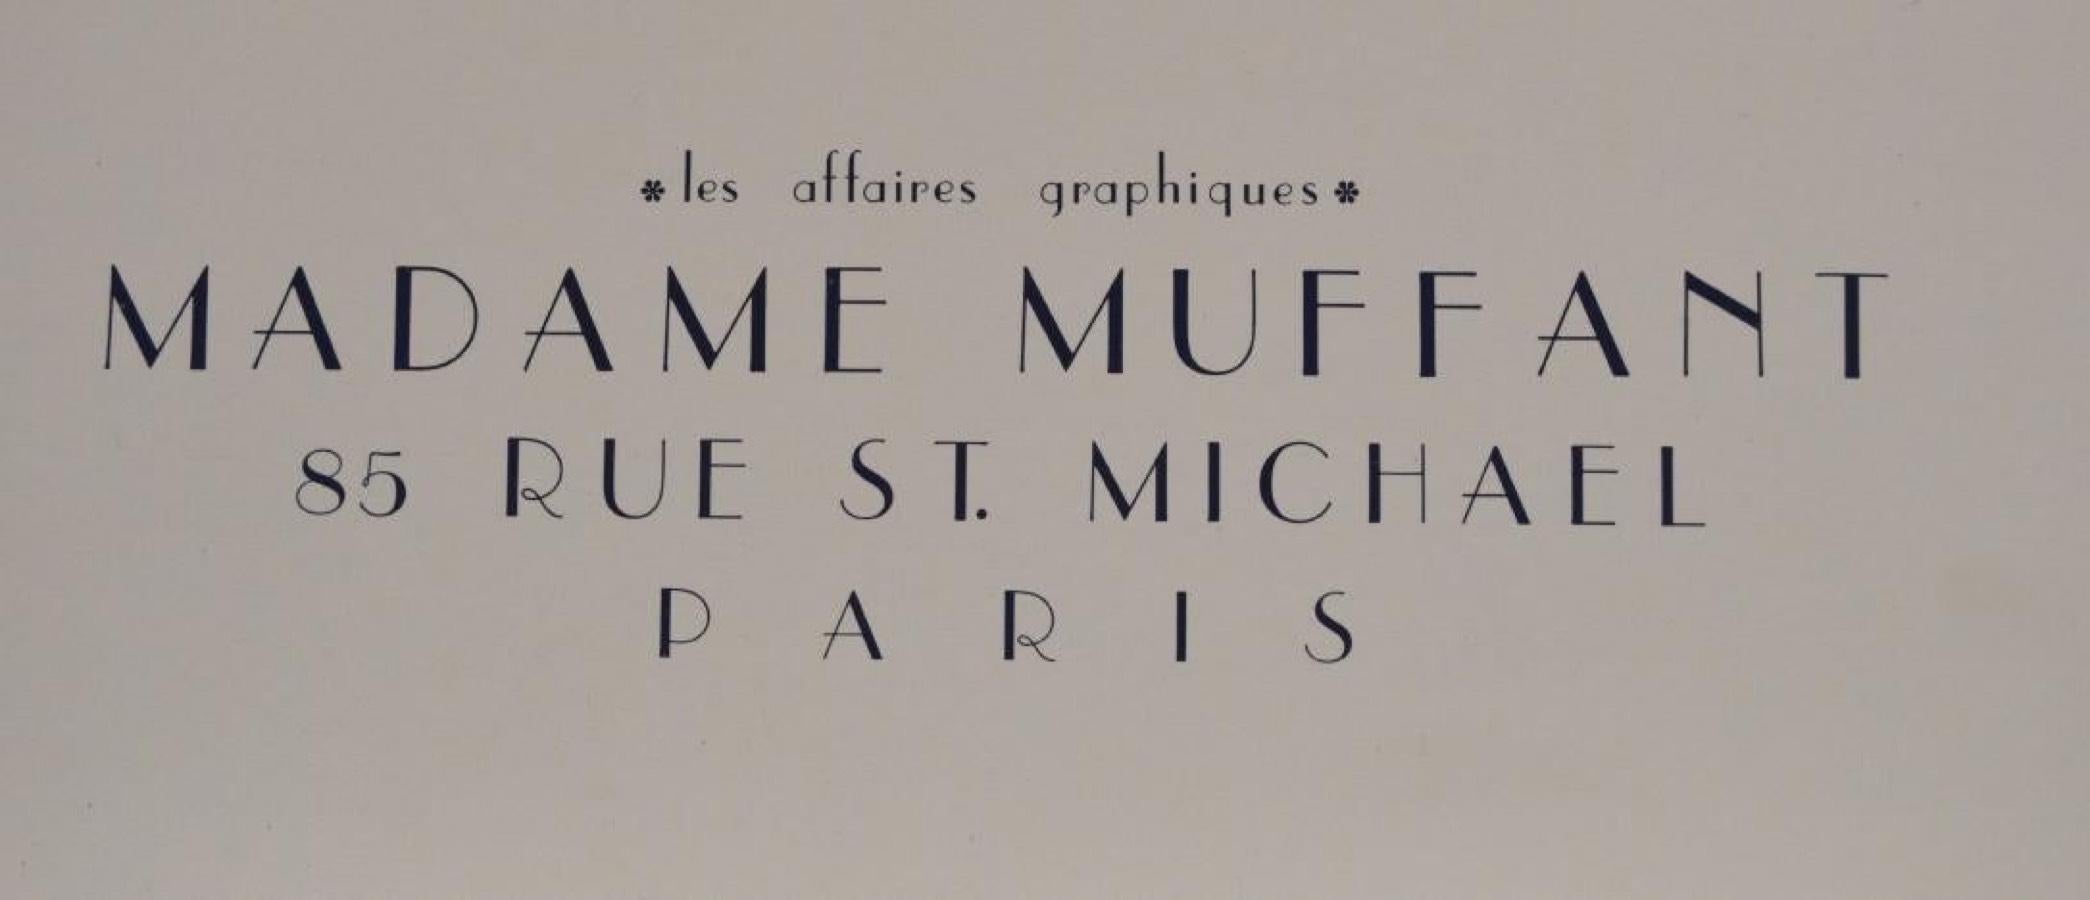 Poster-Les Affairs Graphiques, Madame Muffant - Print by Robert Weil